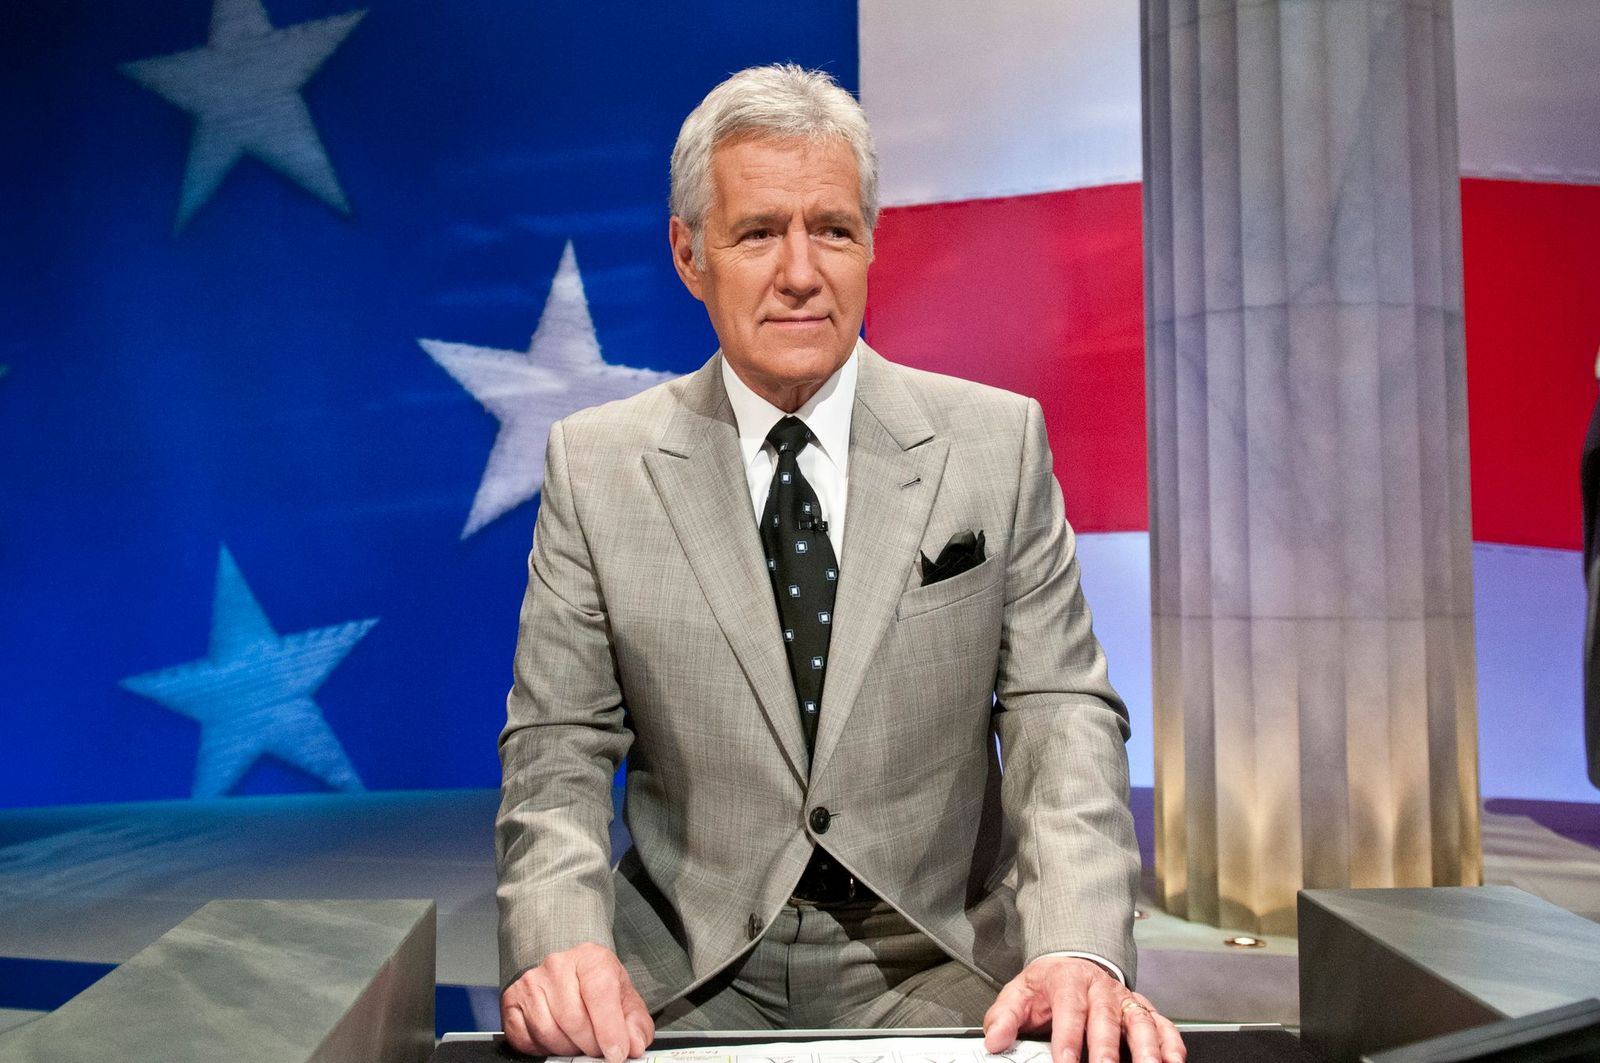 Alex Trebek at a rehearsal before a taping of Jeopardy! Power Players Week at DAR Constitution Hall on April 21, 2012 | Photo: Getty Images